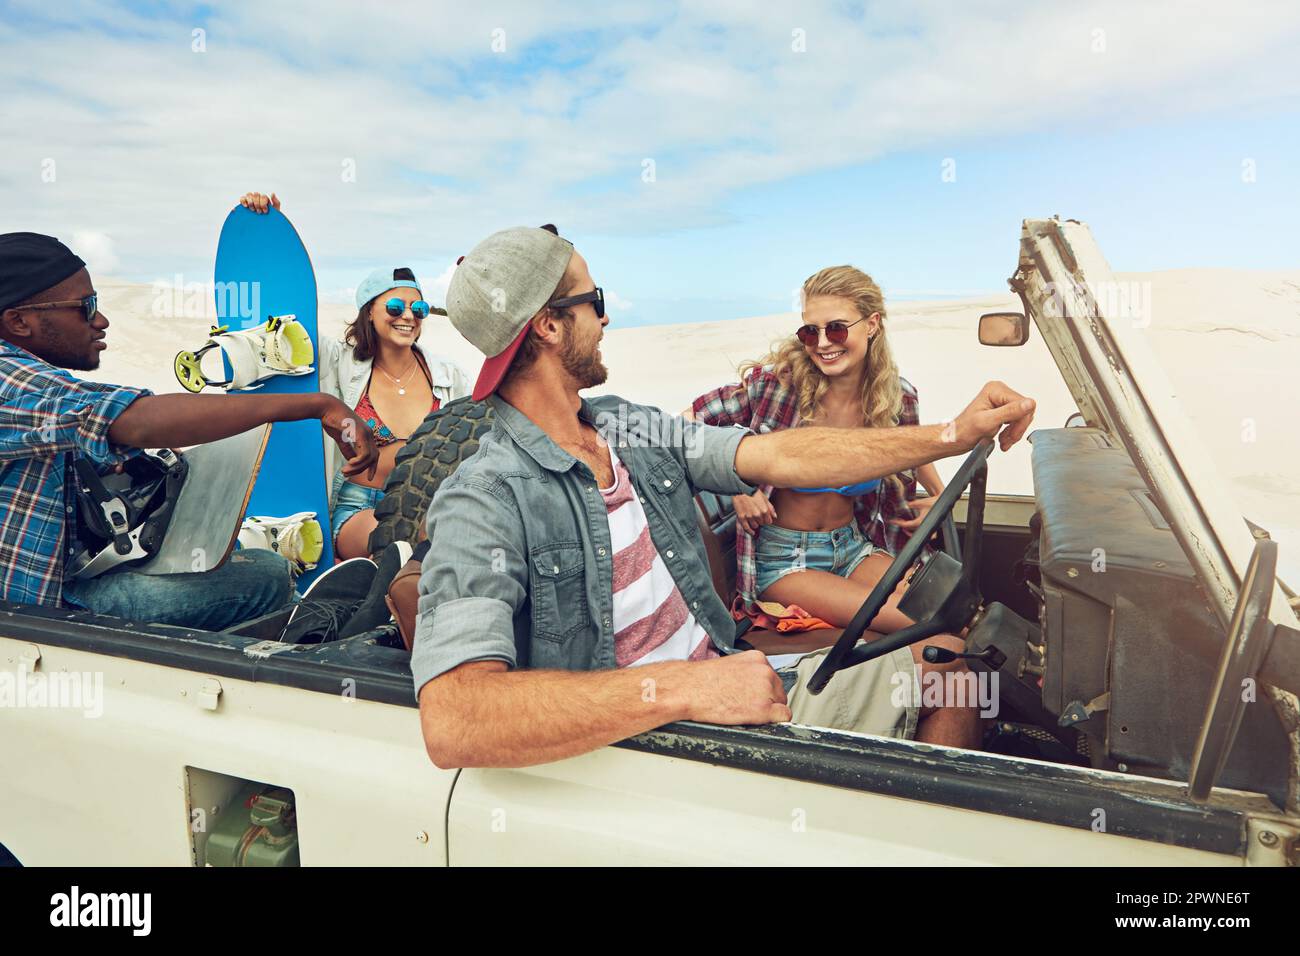 Theyre all about that road trip life. a group of young friends going on a sand boarding road trip in the desert. Stock Photo